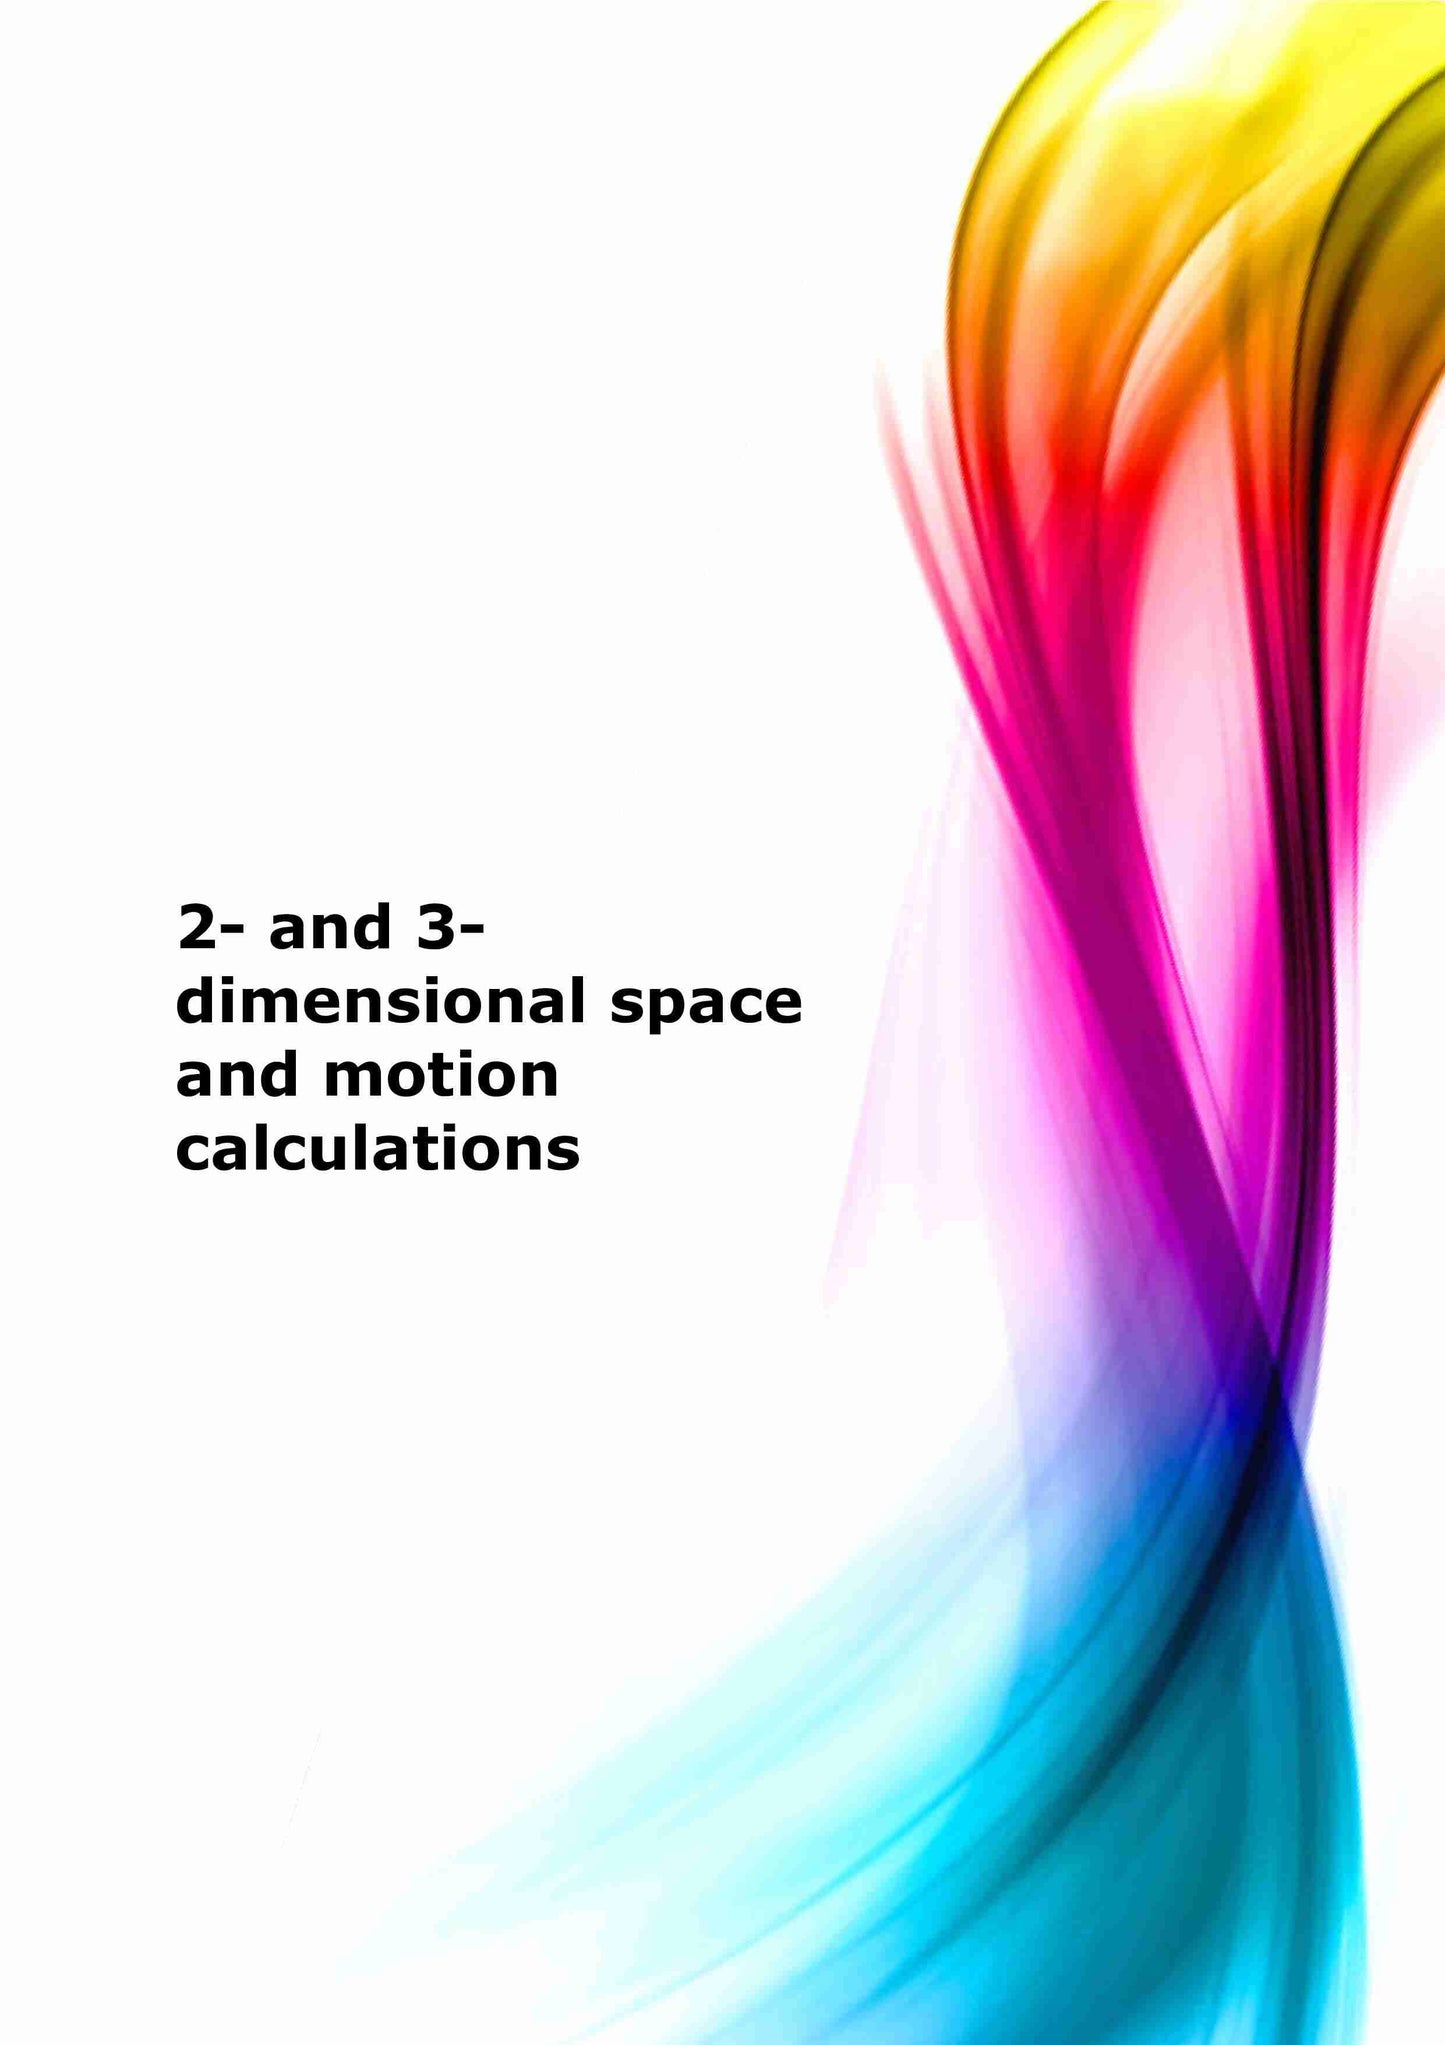 2-and 3-dimensional space and motion calculations